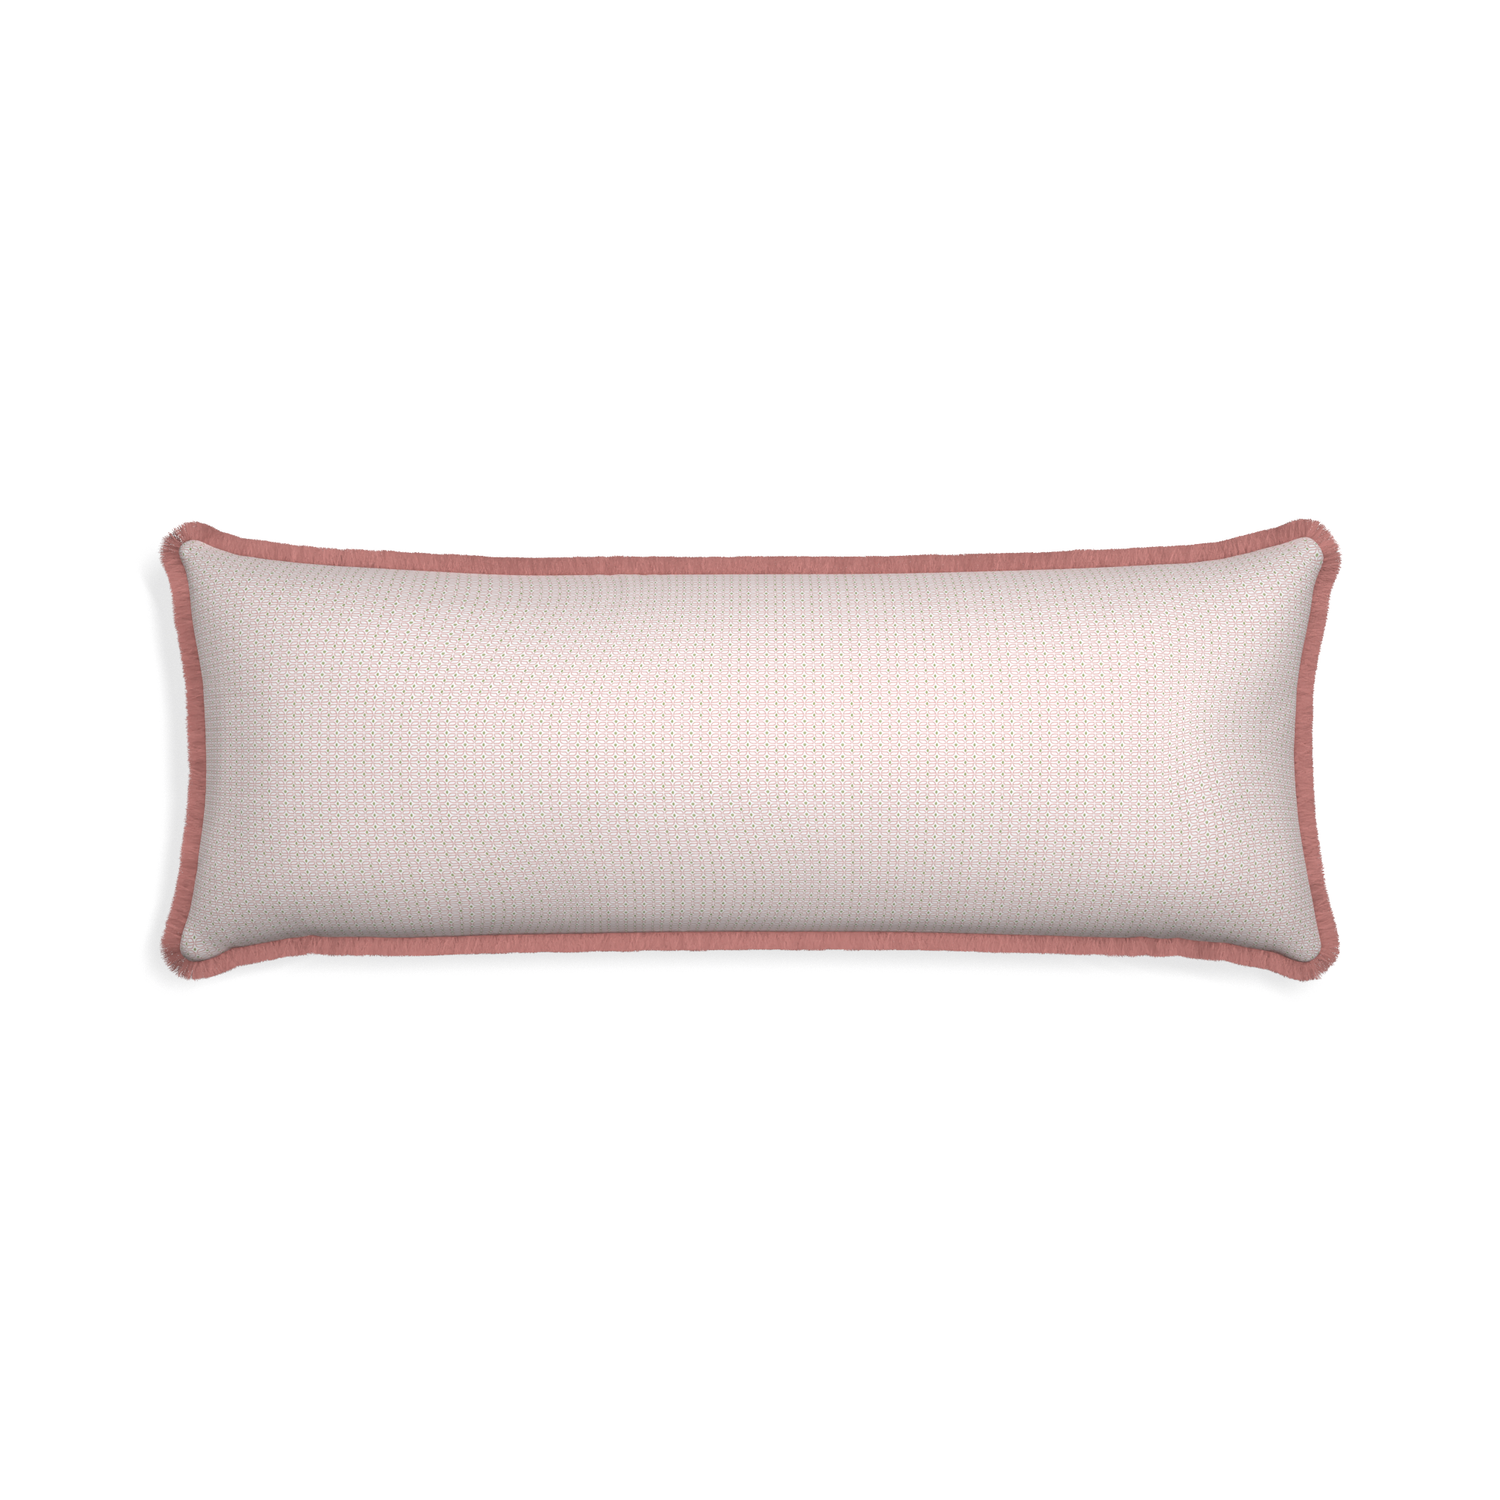 Xl-lumbar loomi pink custom pink geometricpillow with d fringe on white background